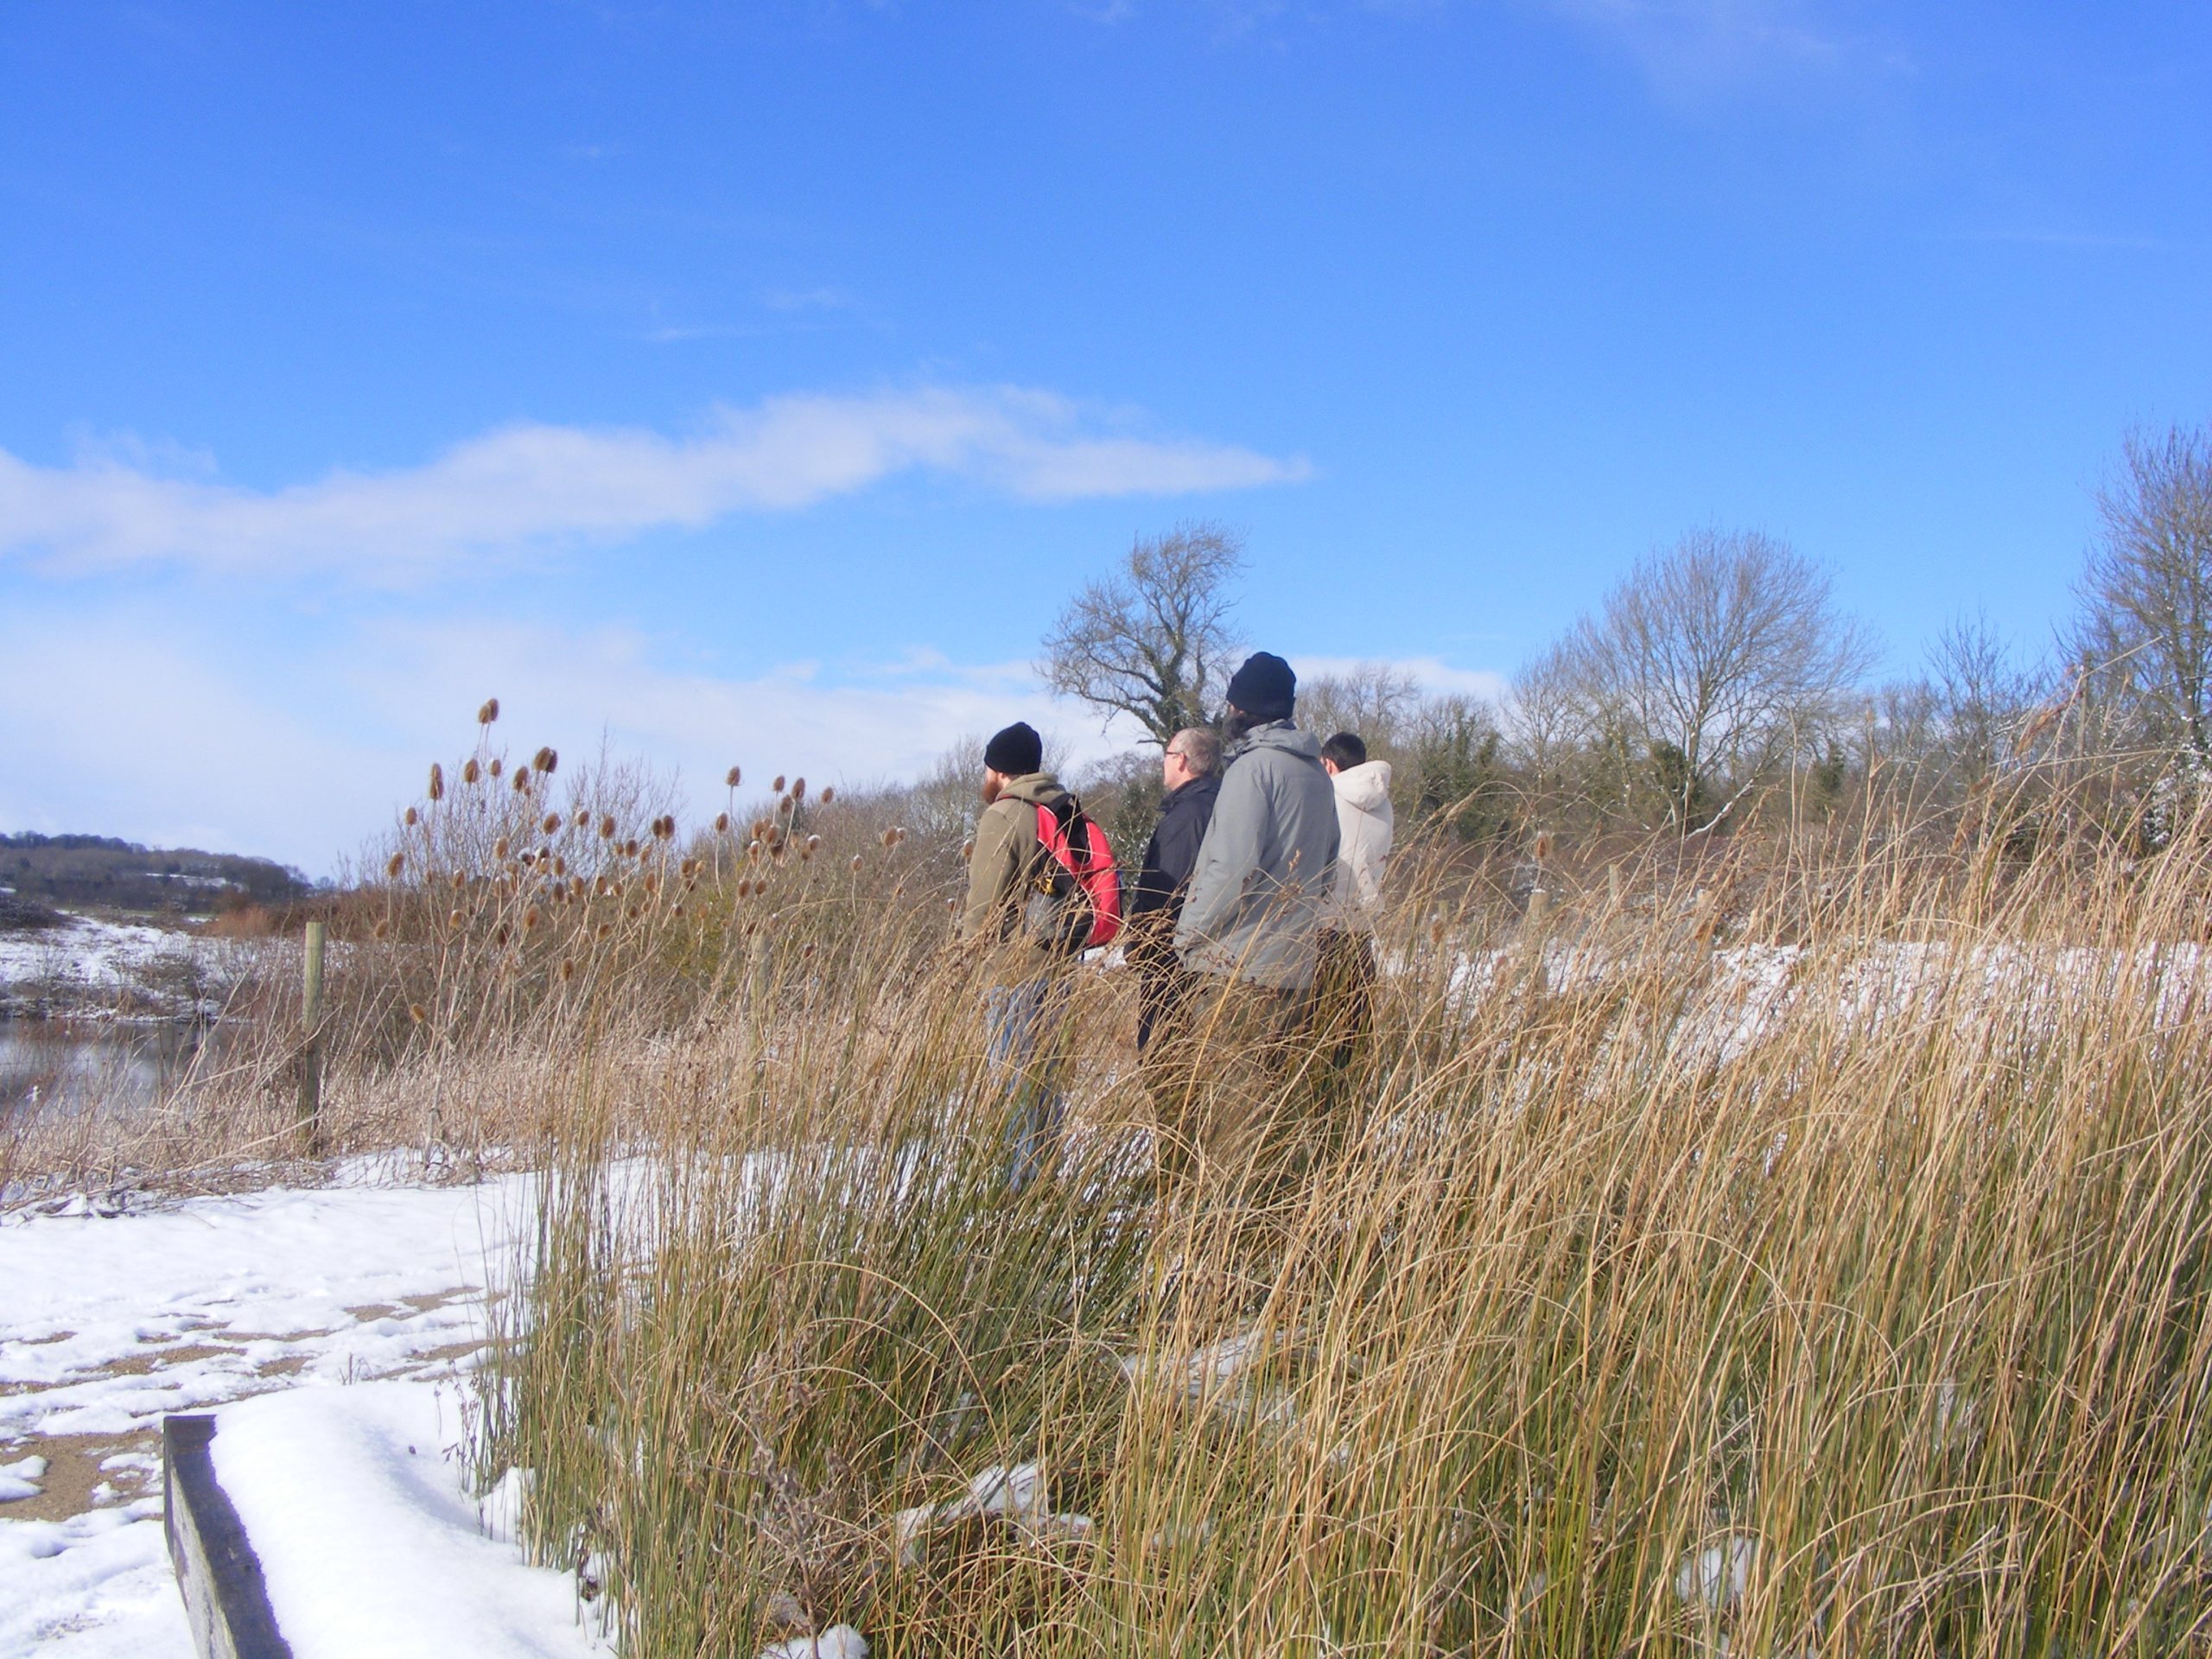 A group of people on a nature reserve in the snow